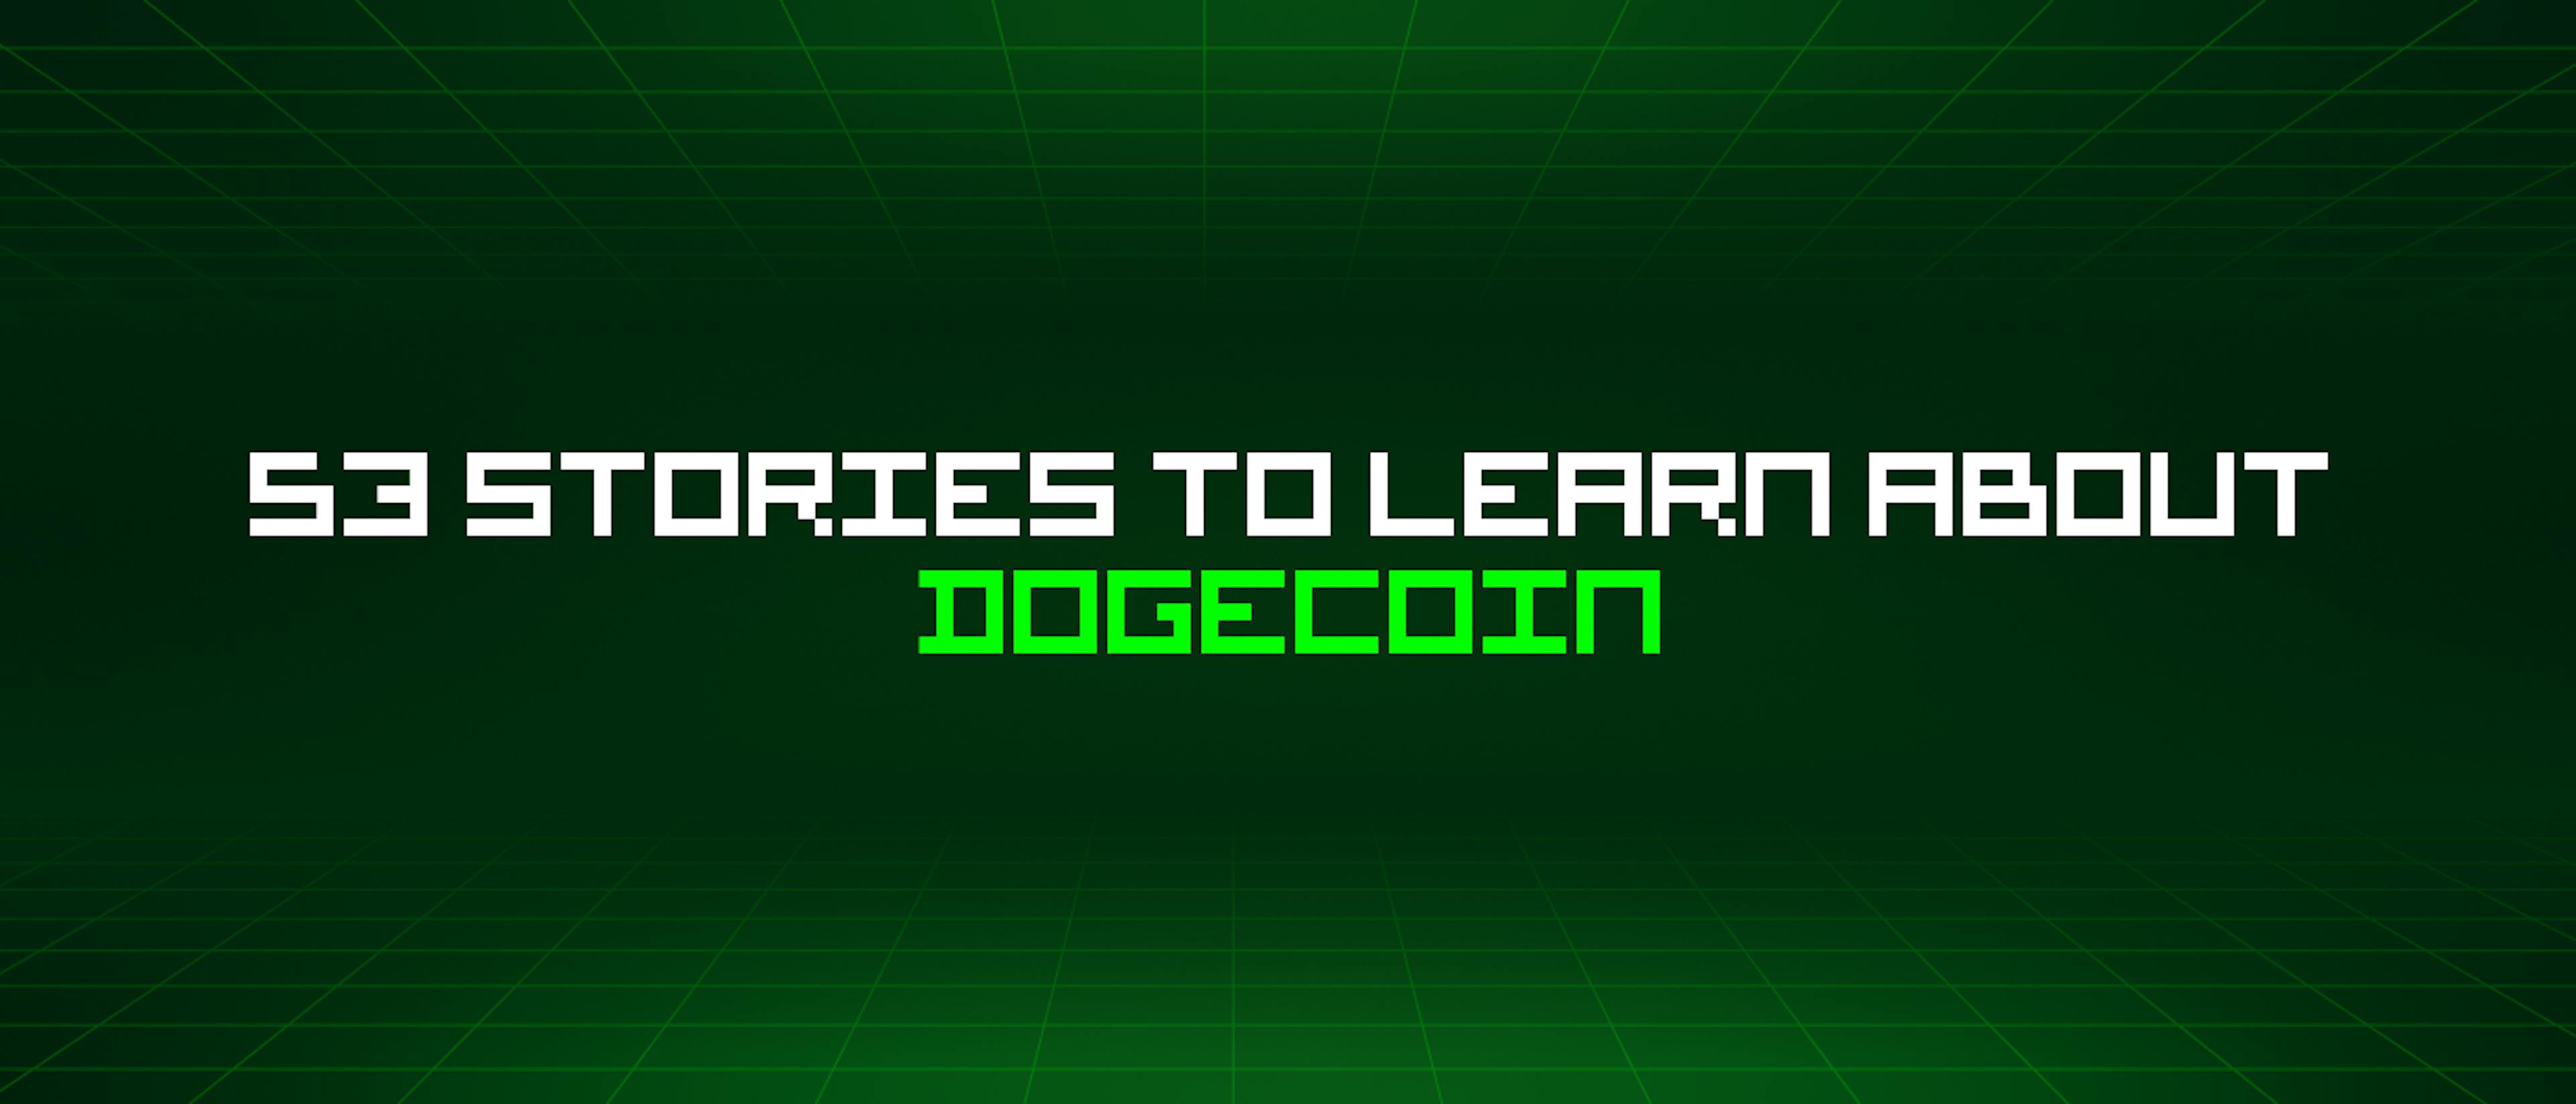 featured image - 53 Stories To Learn About Dogecoin